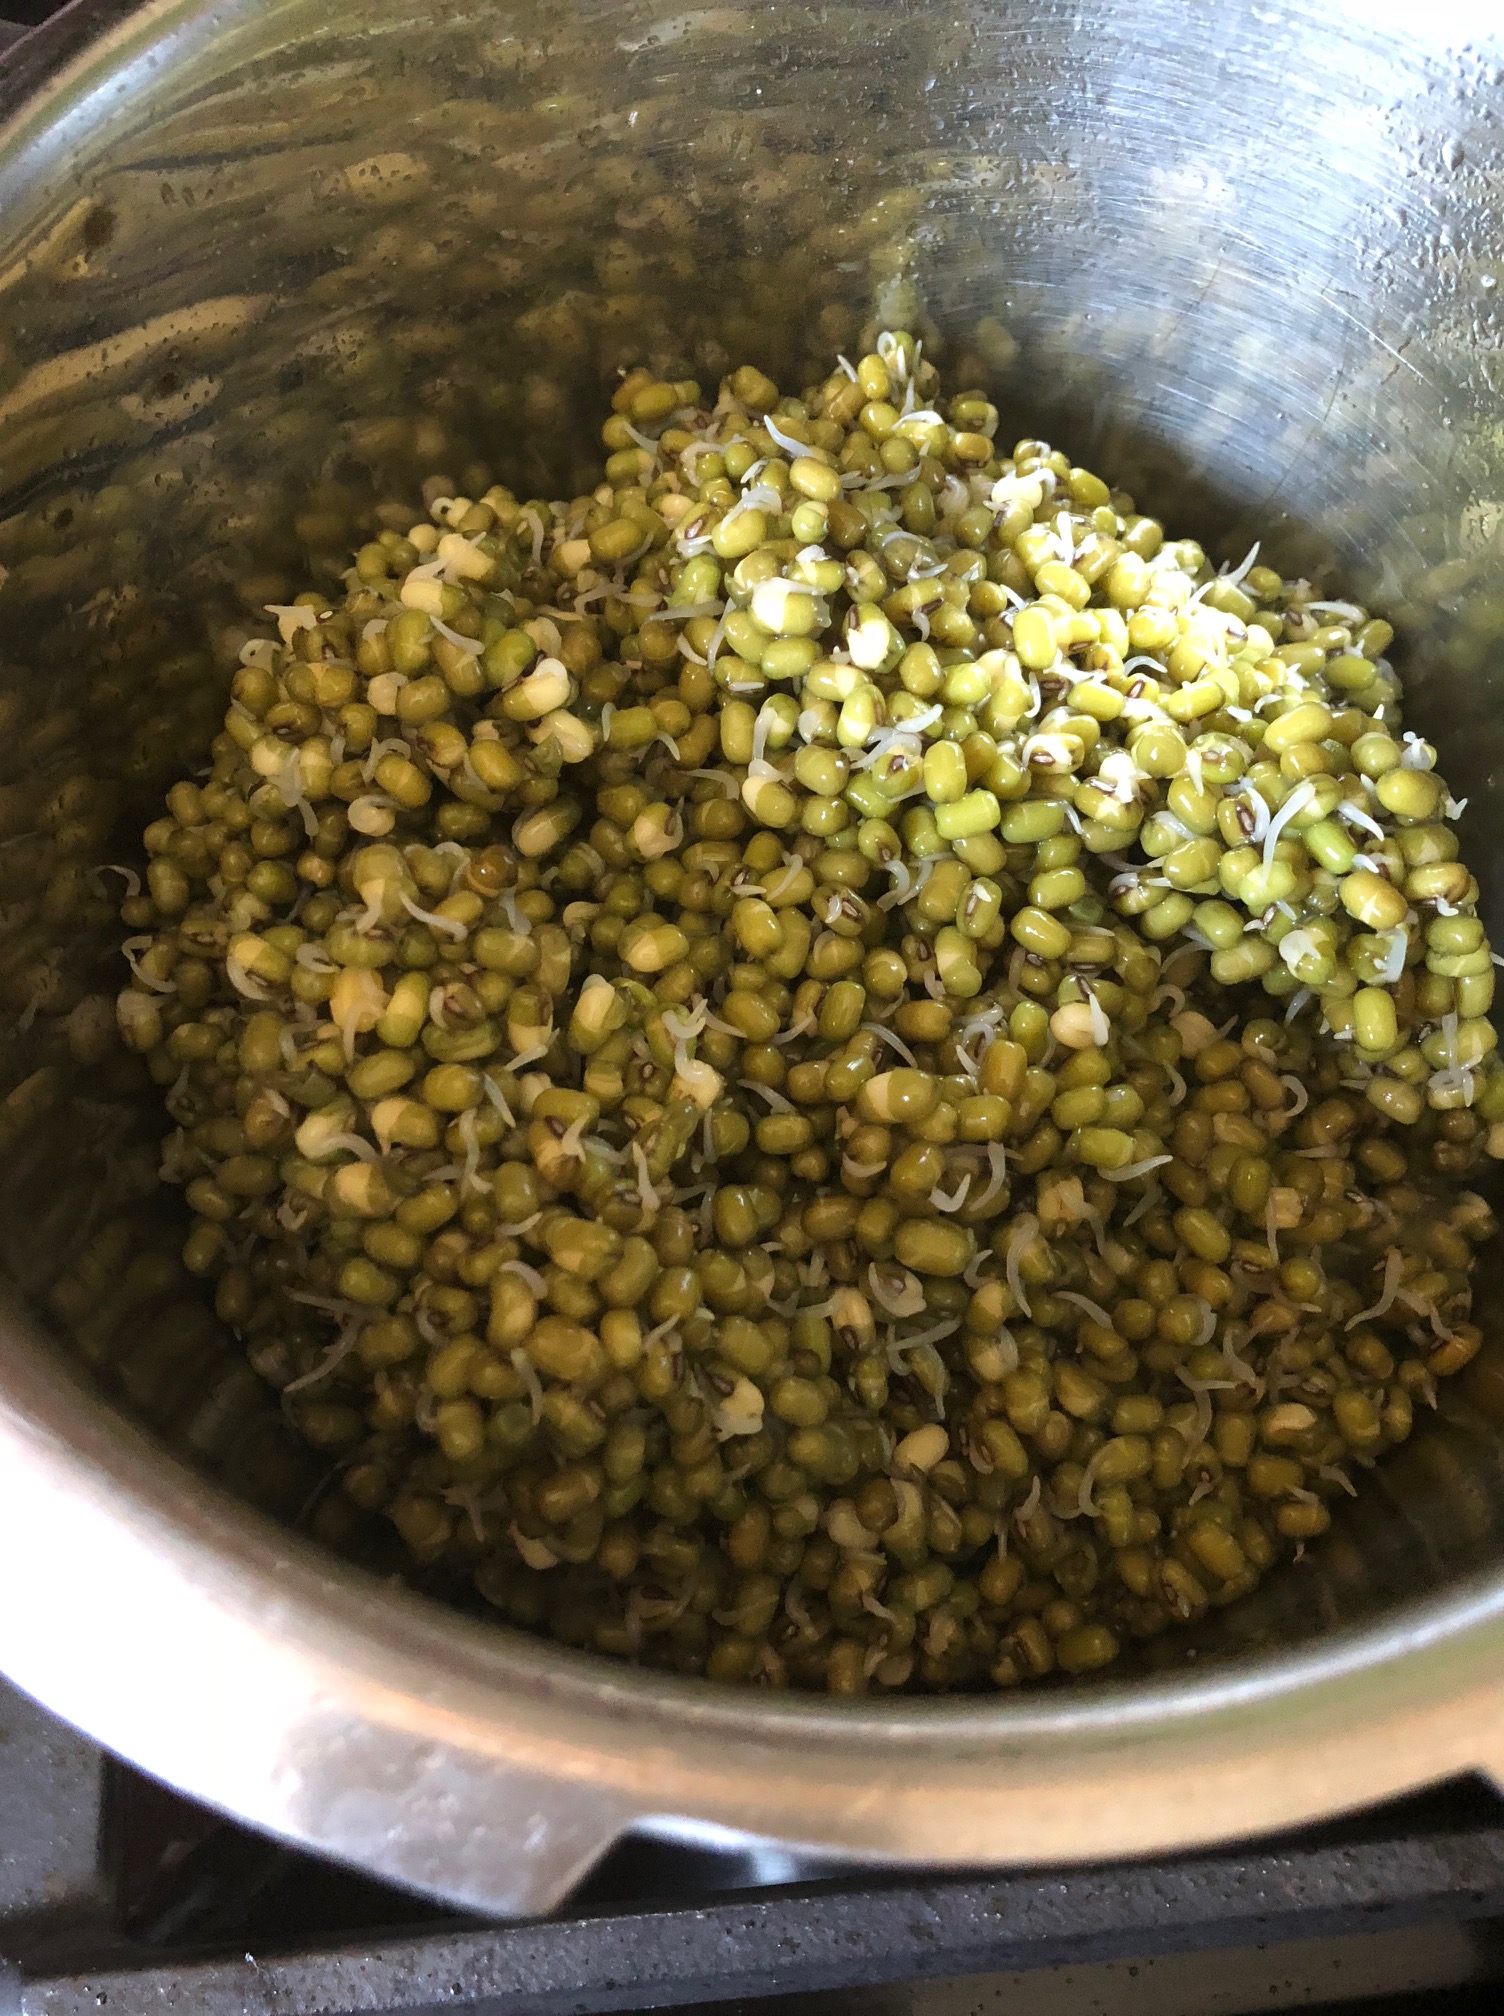 mung beans are in an Instant Pot. They look like a vibrant green with bits of white.